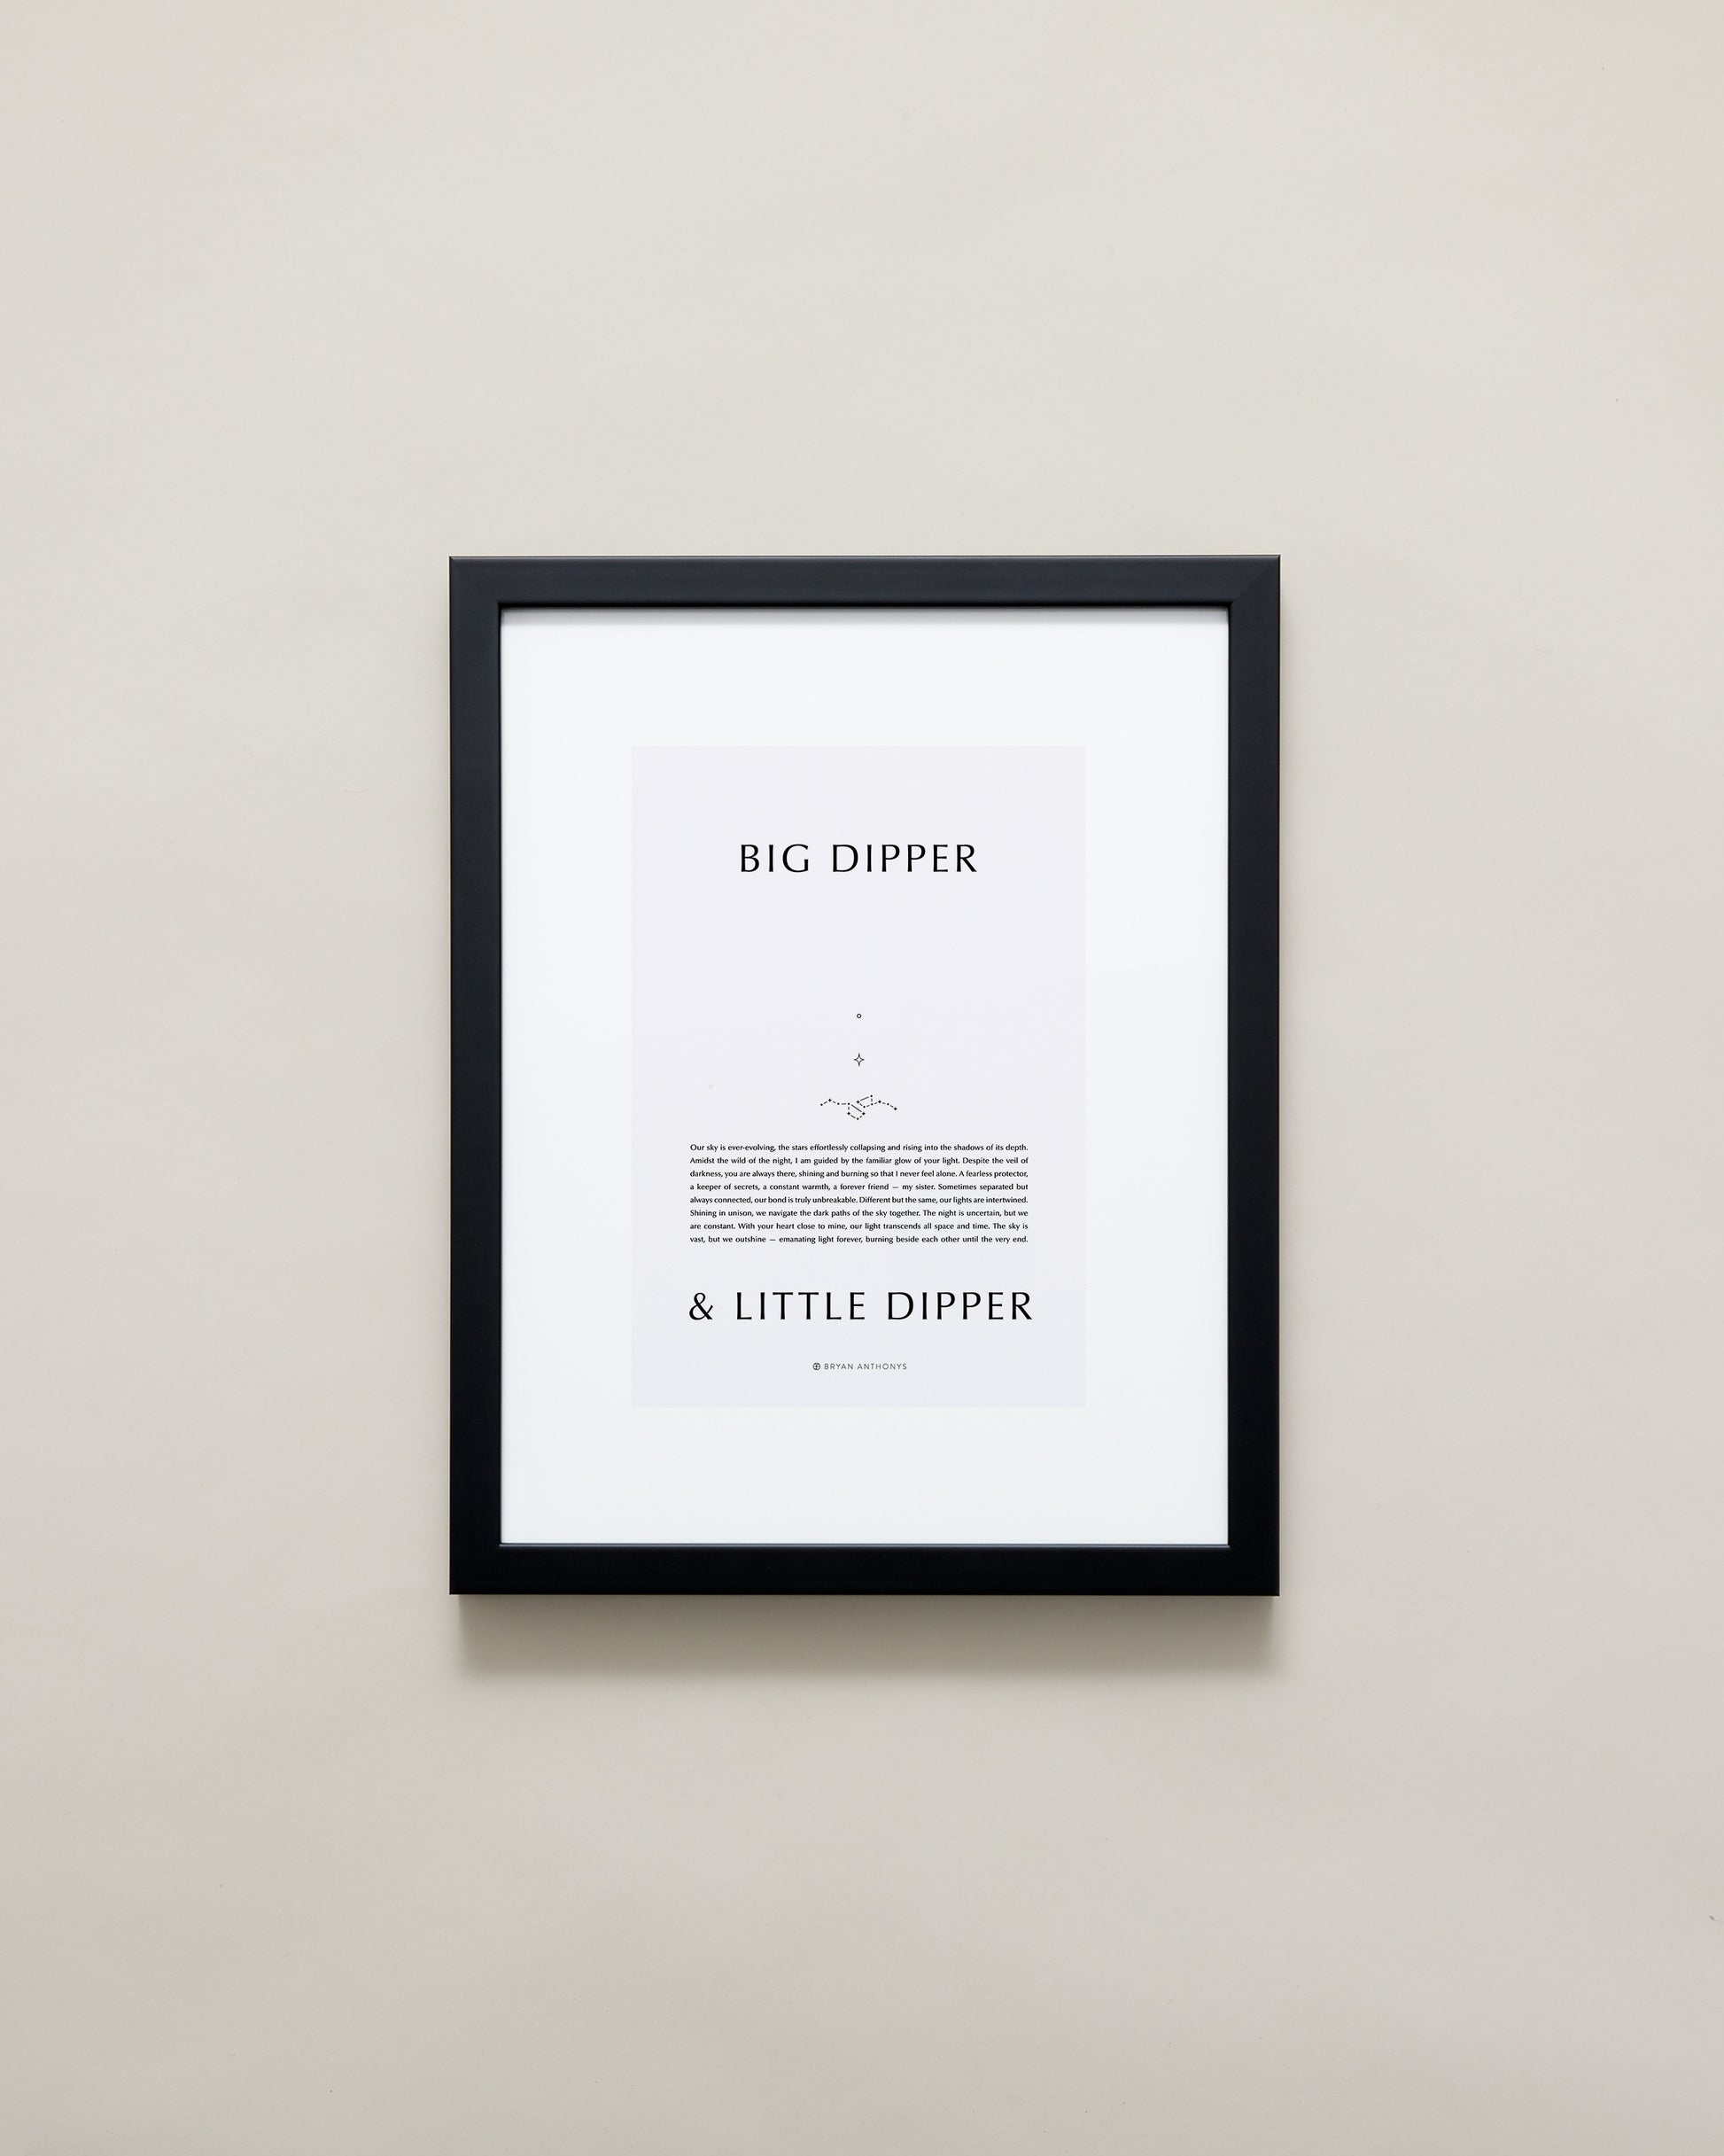 Bryan Anthonys Home Decor Purposeful Prints Big Dipper & Little Dipper Iconic Framed Print Gray Art With Black Frame 11x14